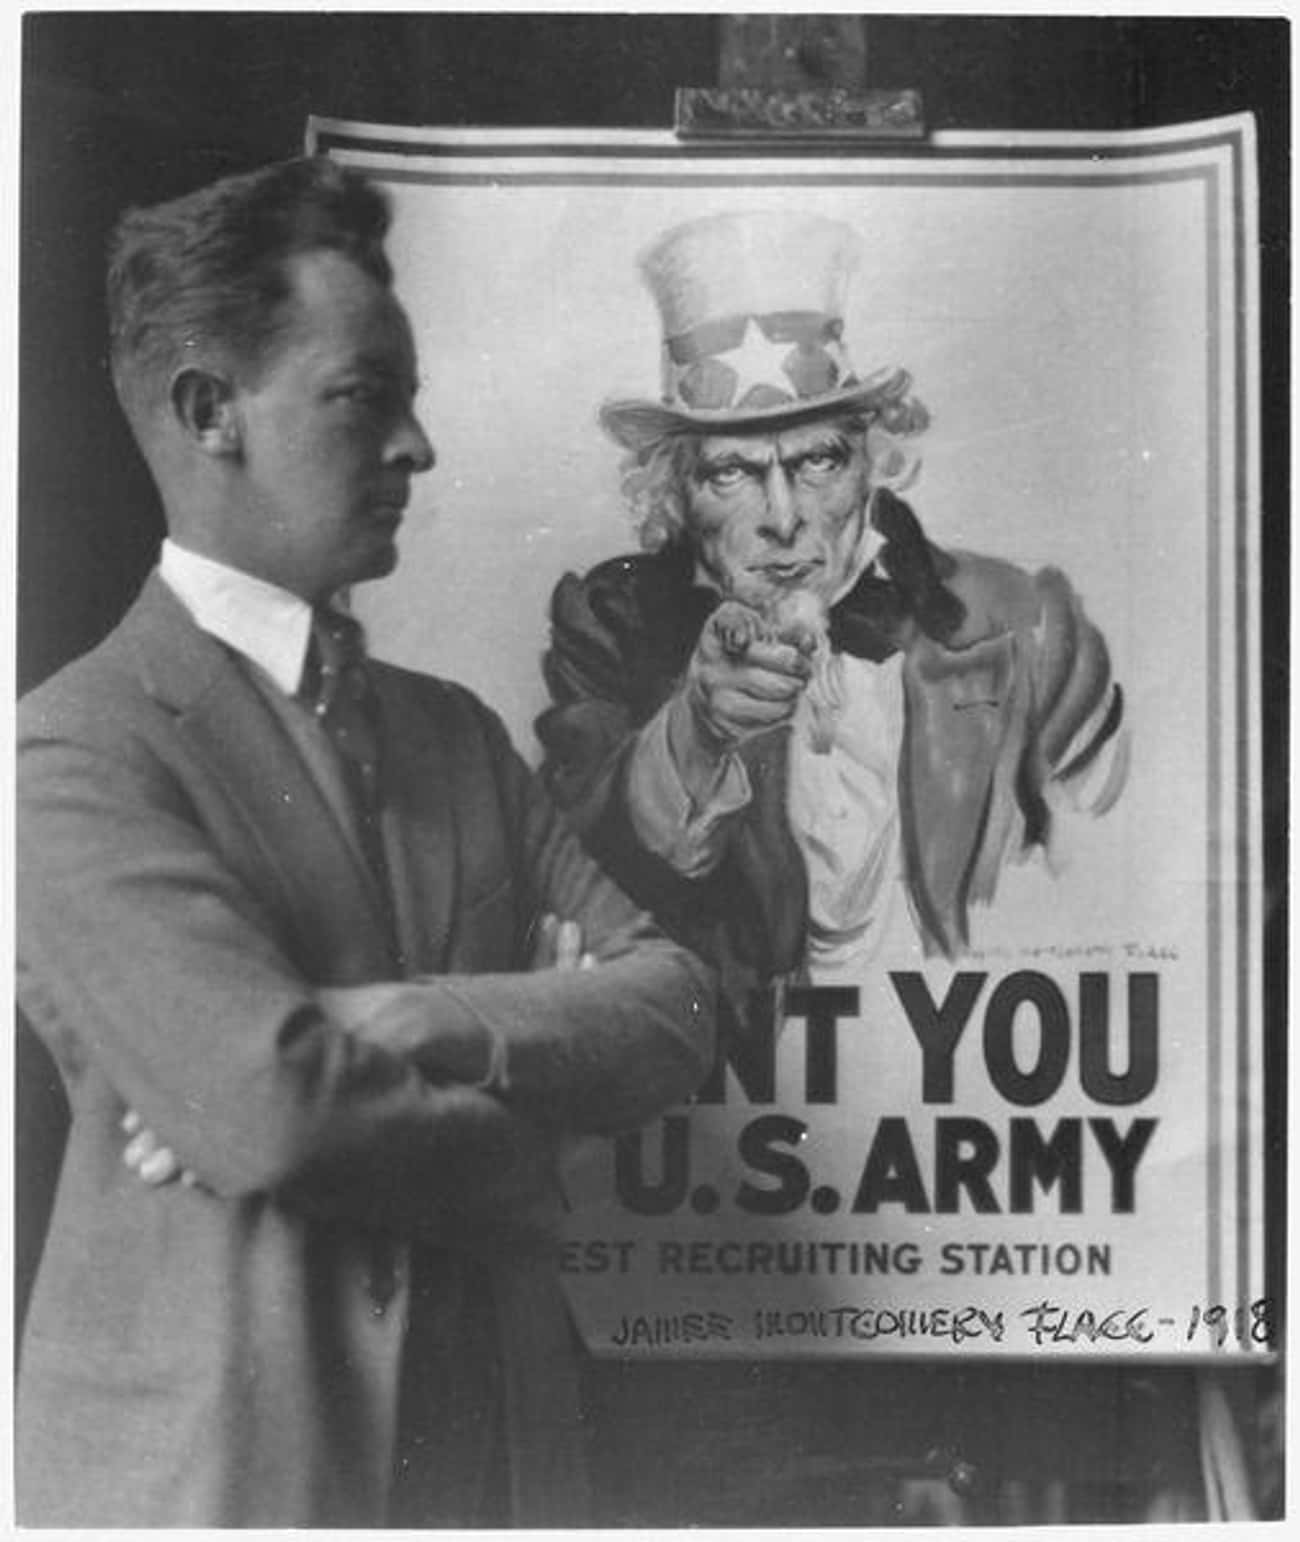 Uncle Sam Was A Musician Named Walter Botts Who Was Chosen By A Poster-Maker For His Distinct Features